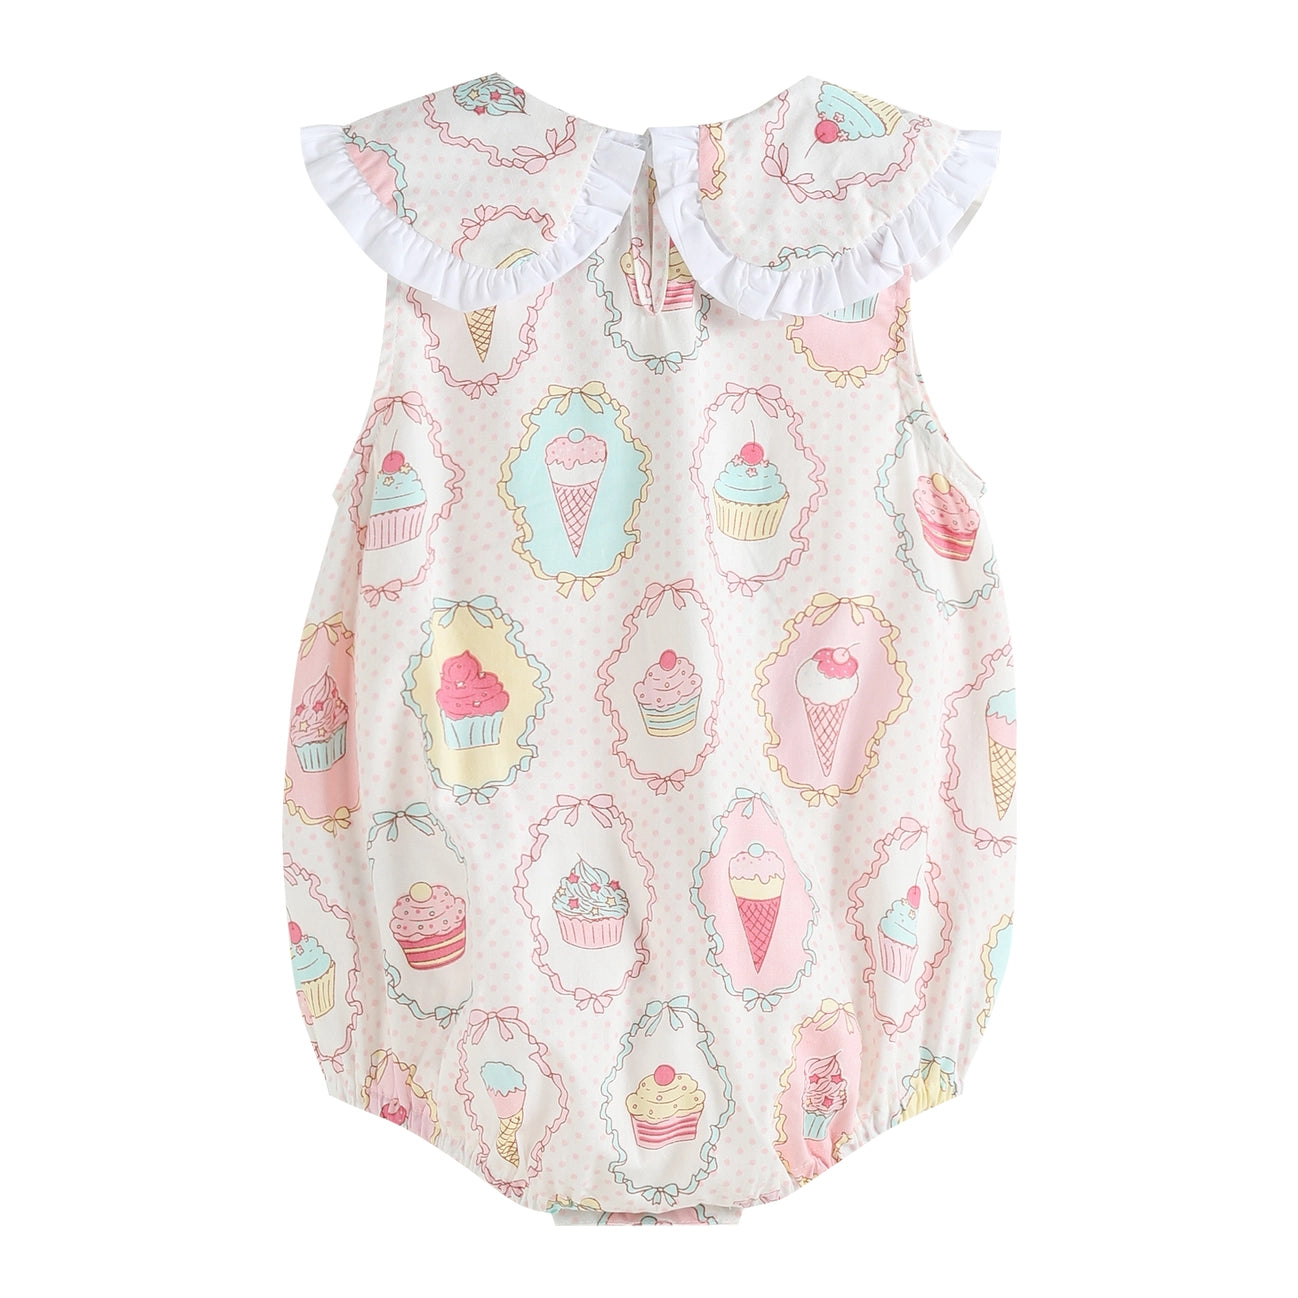 Sweet Bakery Print Cupcake Collared Bubble Romper